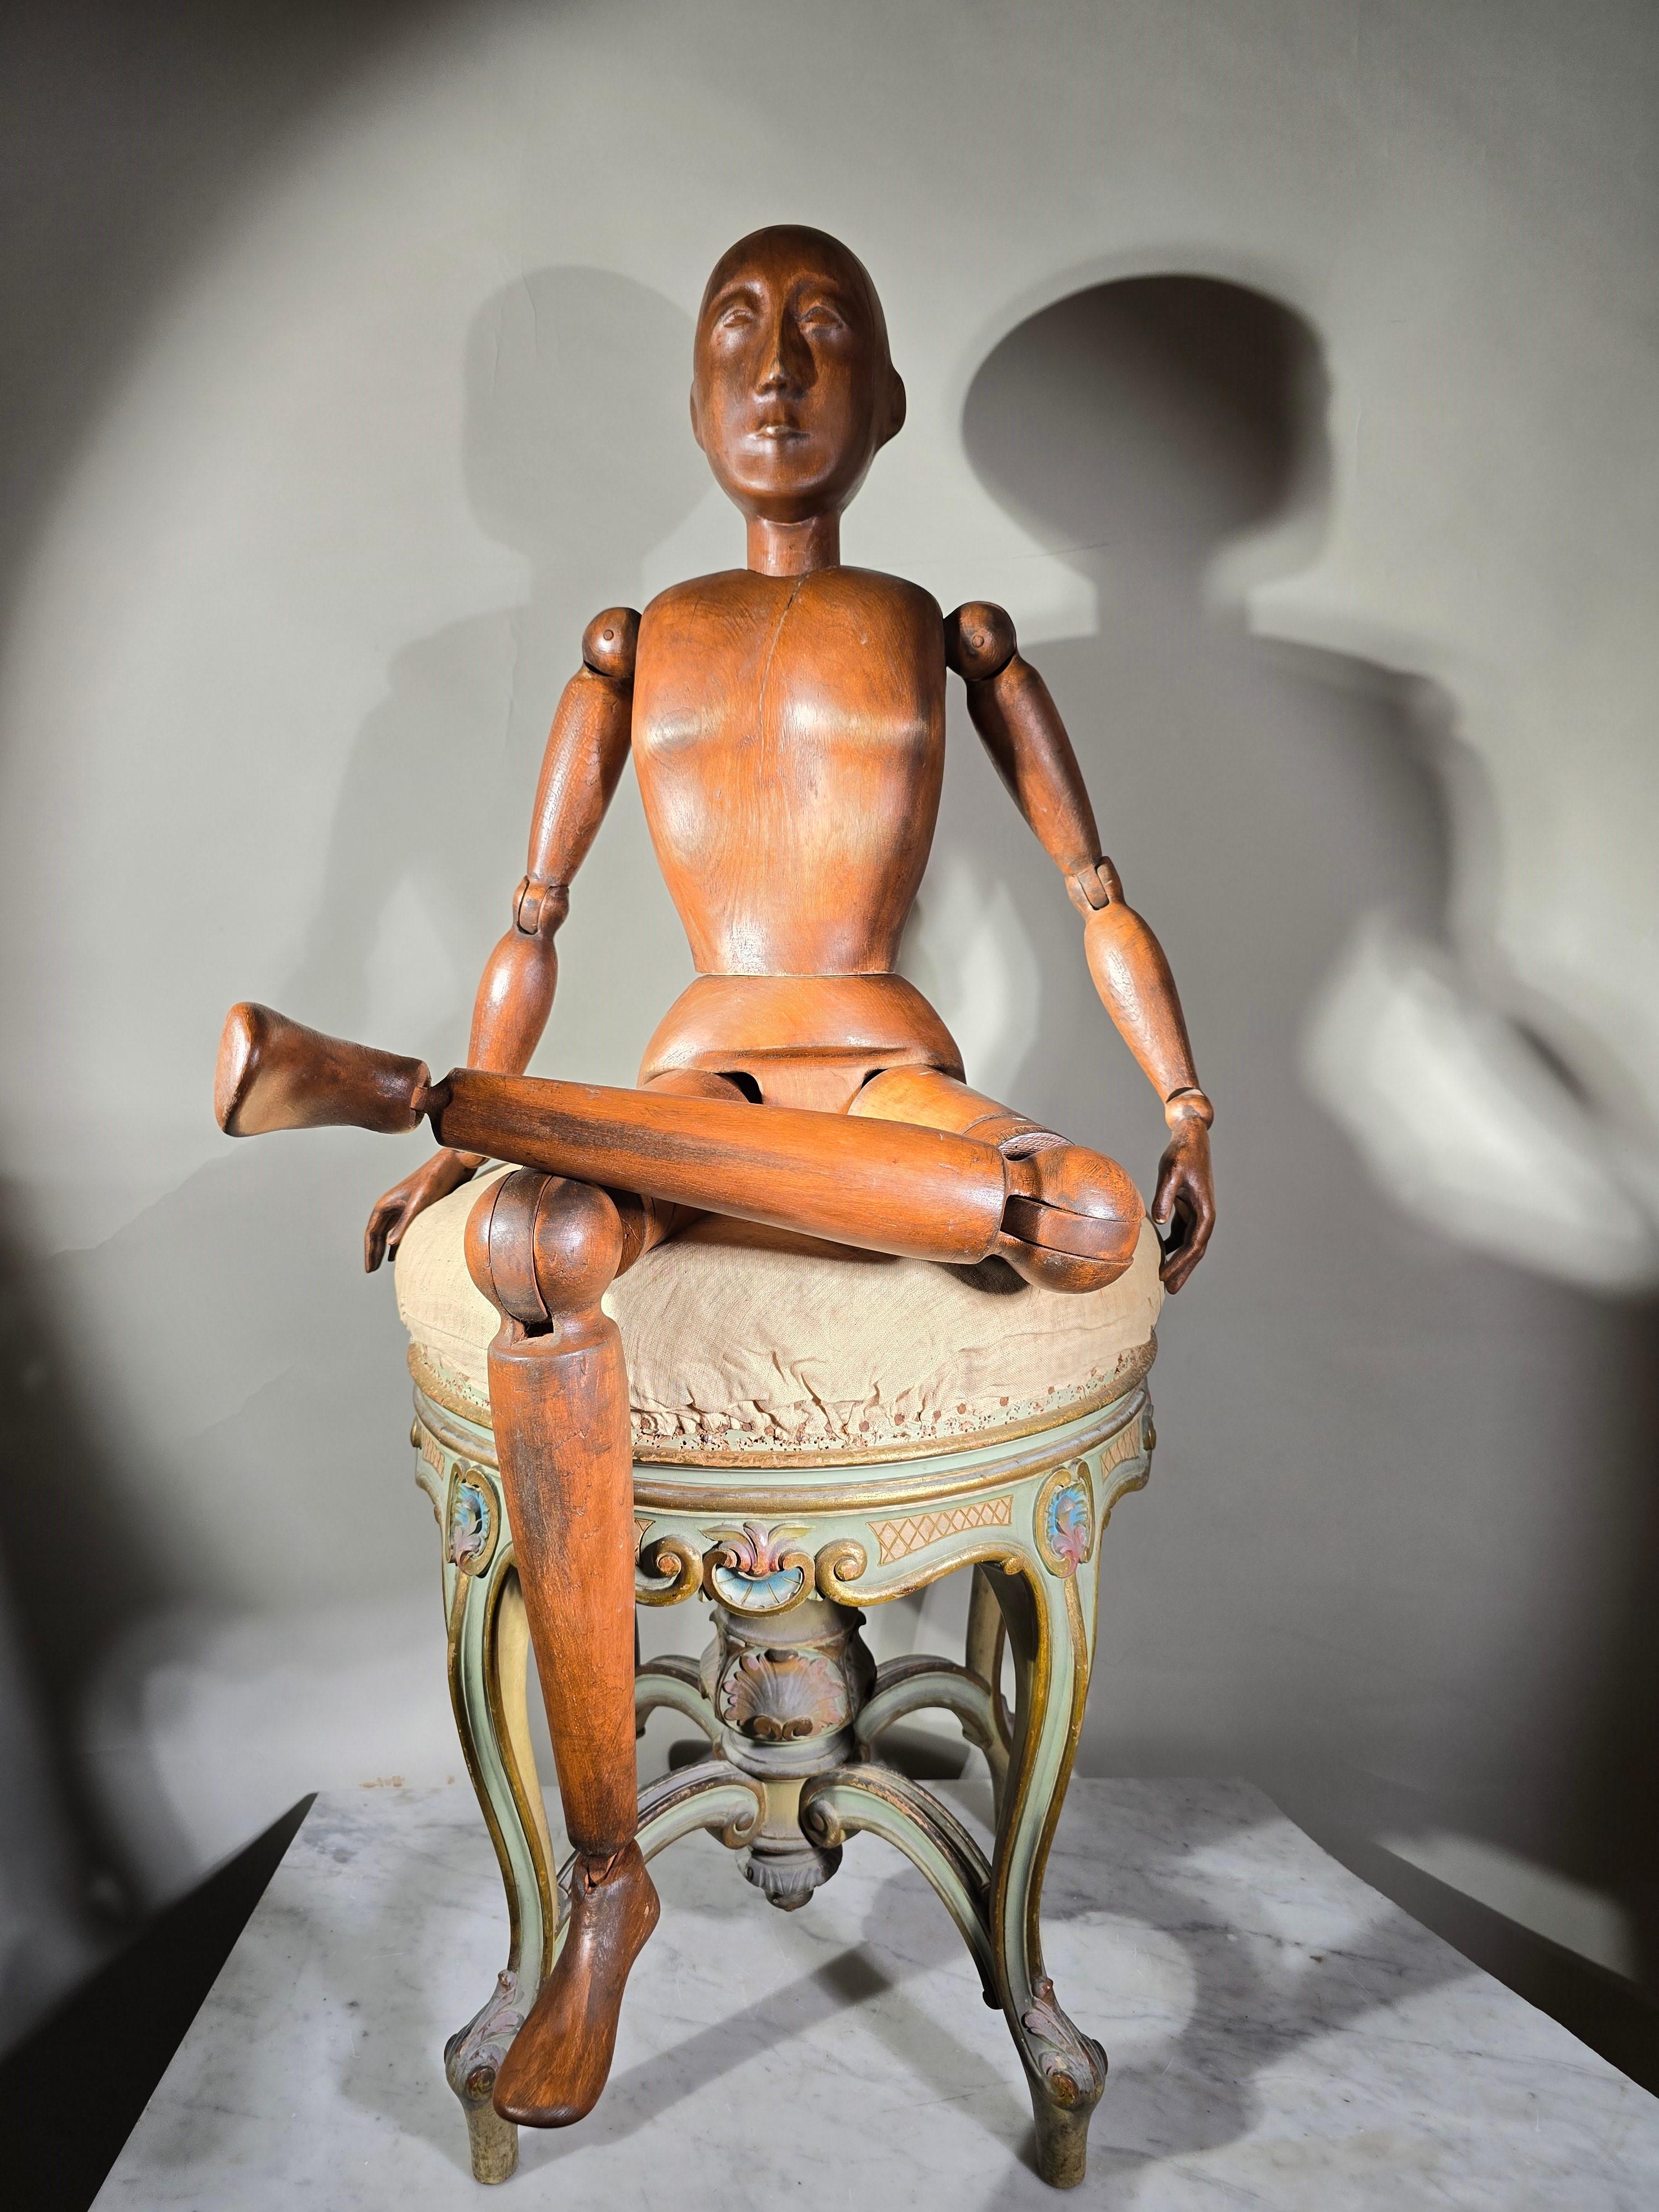 This elegant Italian artist's mannequin from approximately 1900 is a beautiful representation of craftsmanship from the 19th century. Crafted from solid fruitwood, it stands as a testament to the skill and artistry of Italian artisans of the